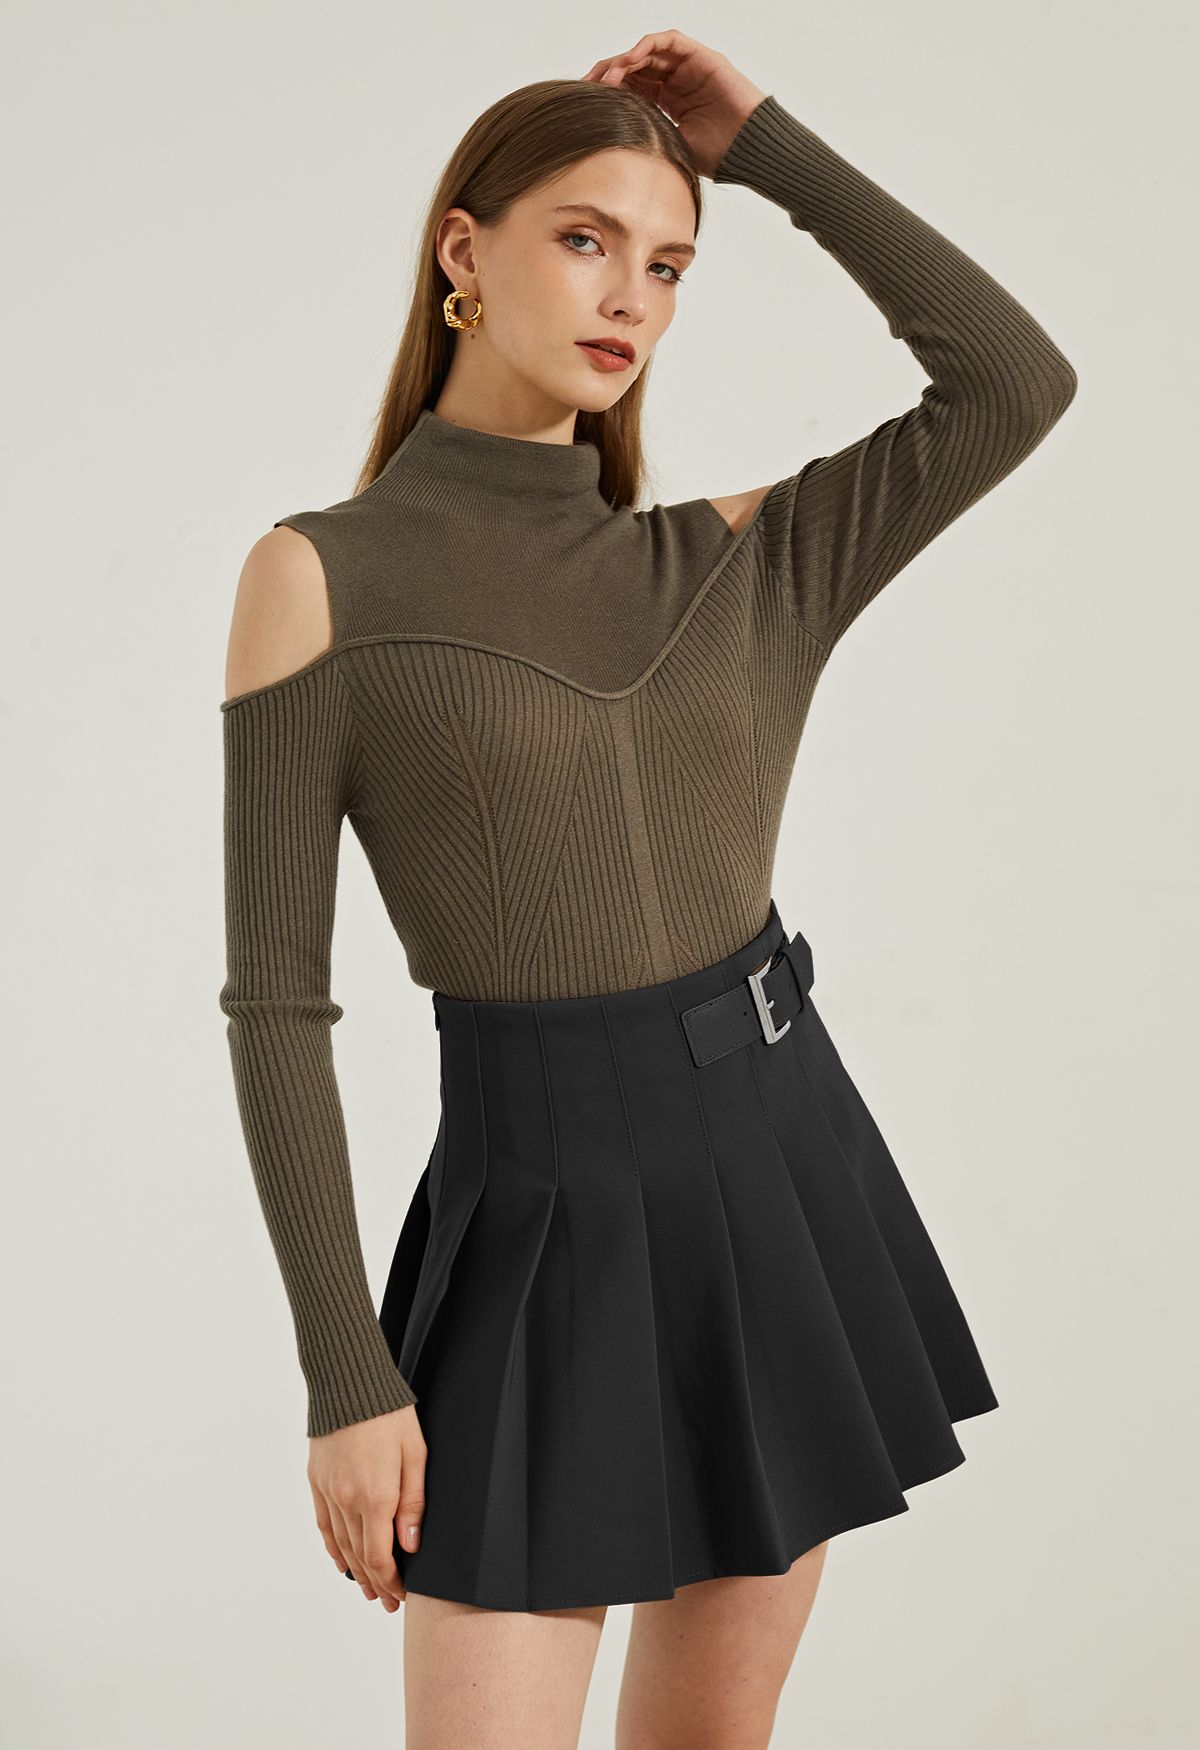 Belted Pleated Flare Mini Skirt in Black